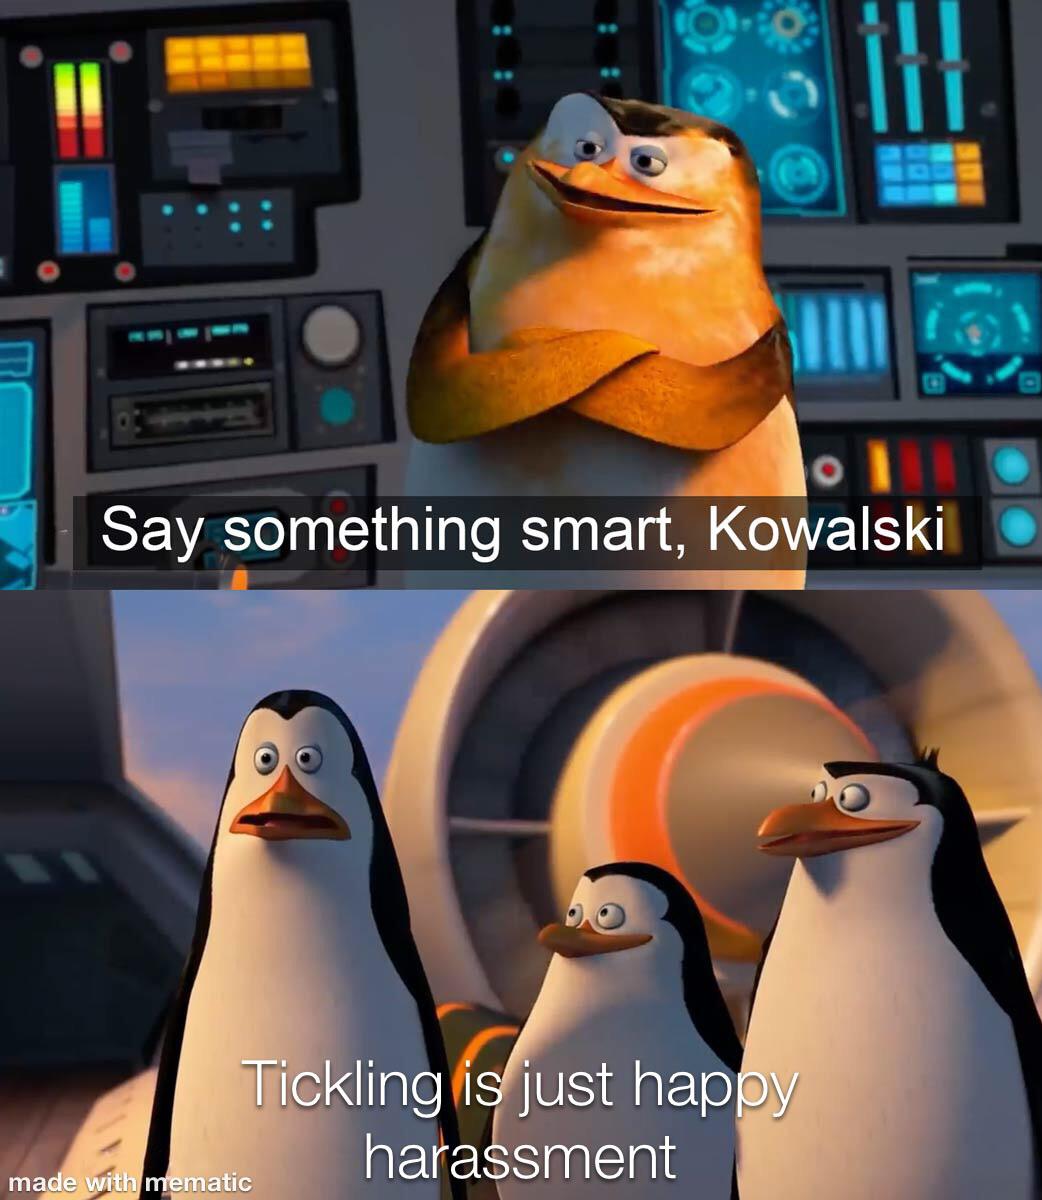 say something smart kowalski - Say something smart, Kowalski Tickling is just happy harassment made with mematic